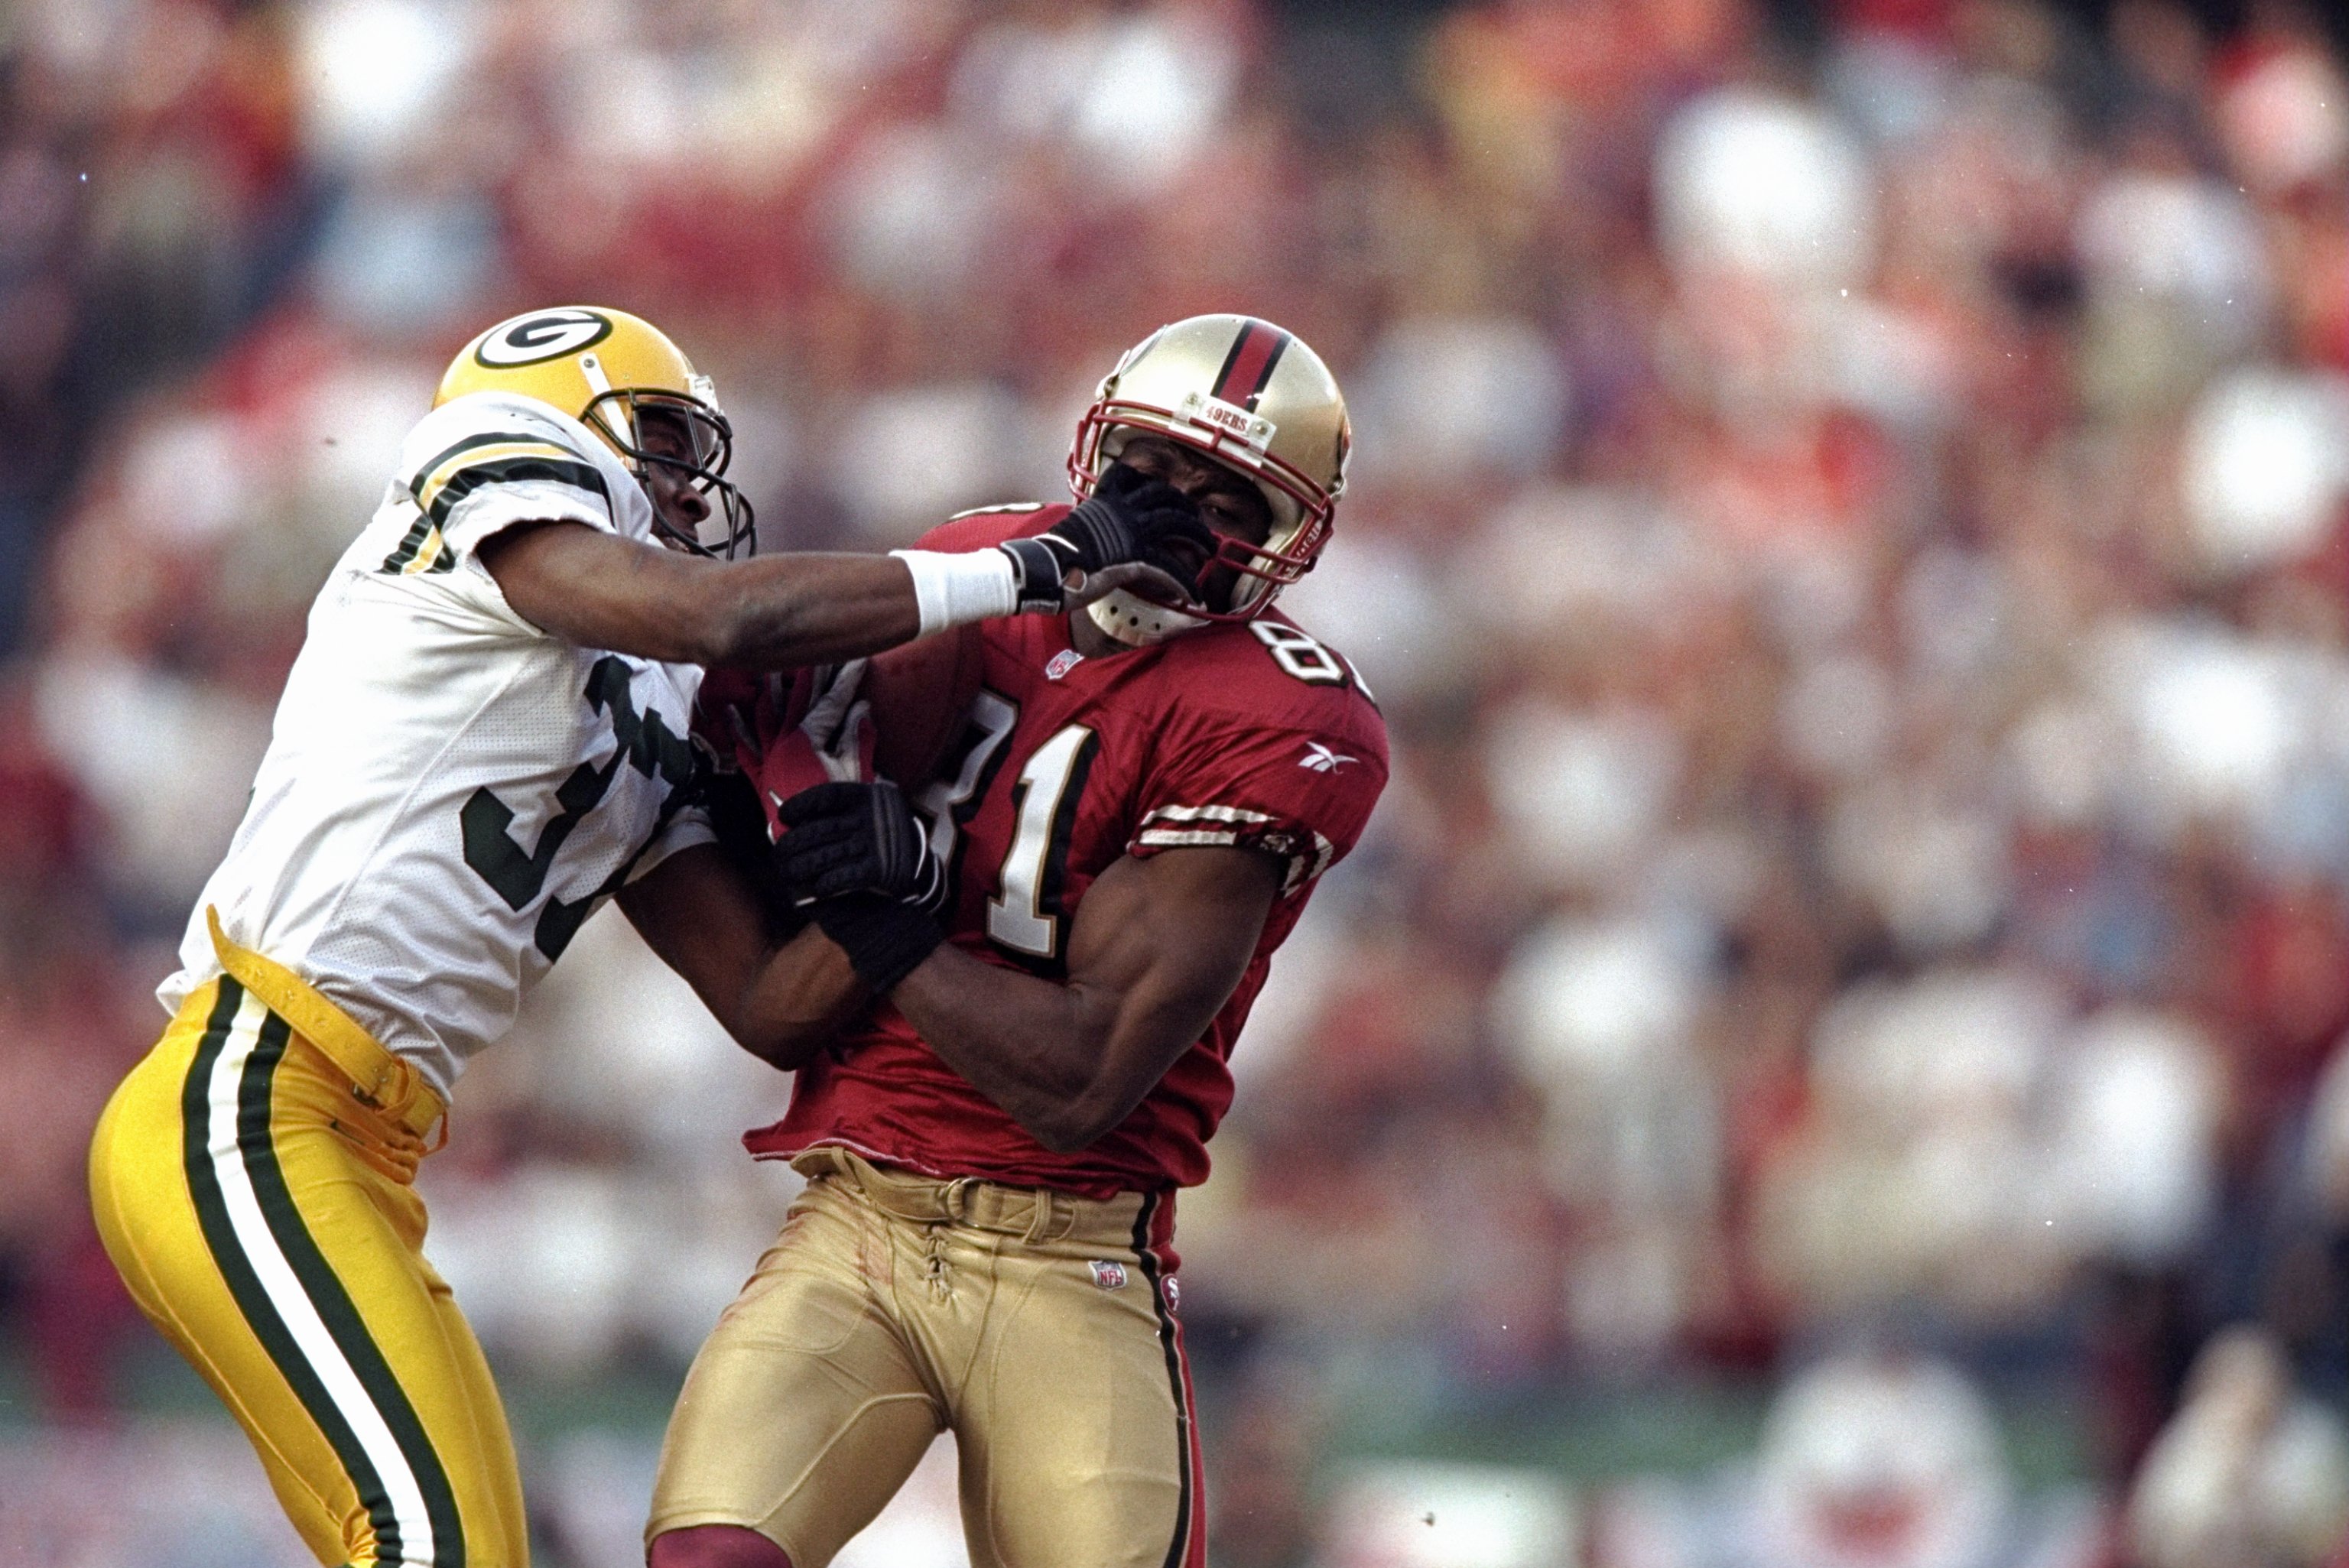 San Francisco 49ers vs Green Bay Packers (Round 9): The most